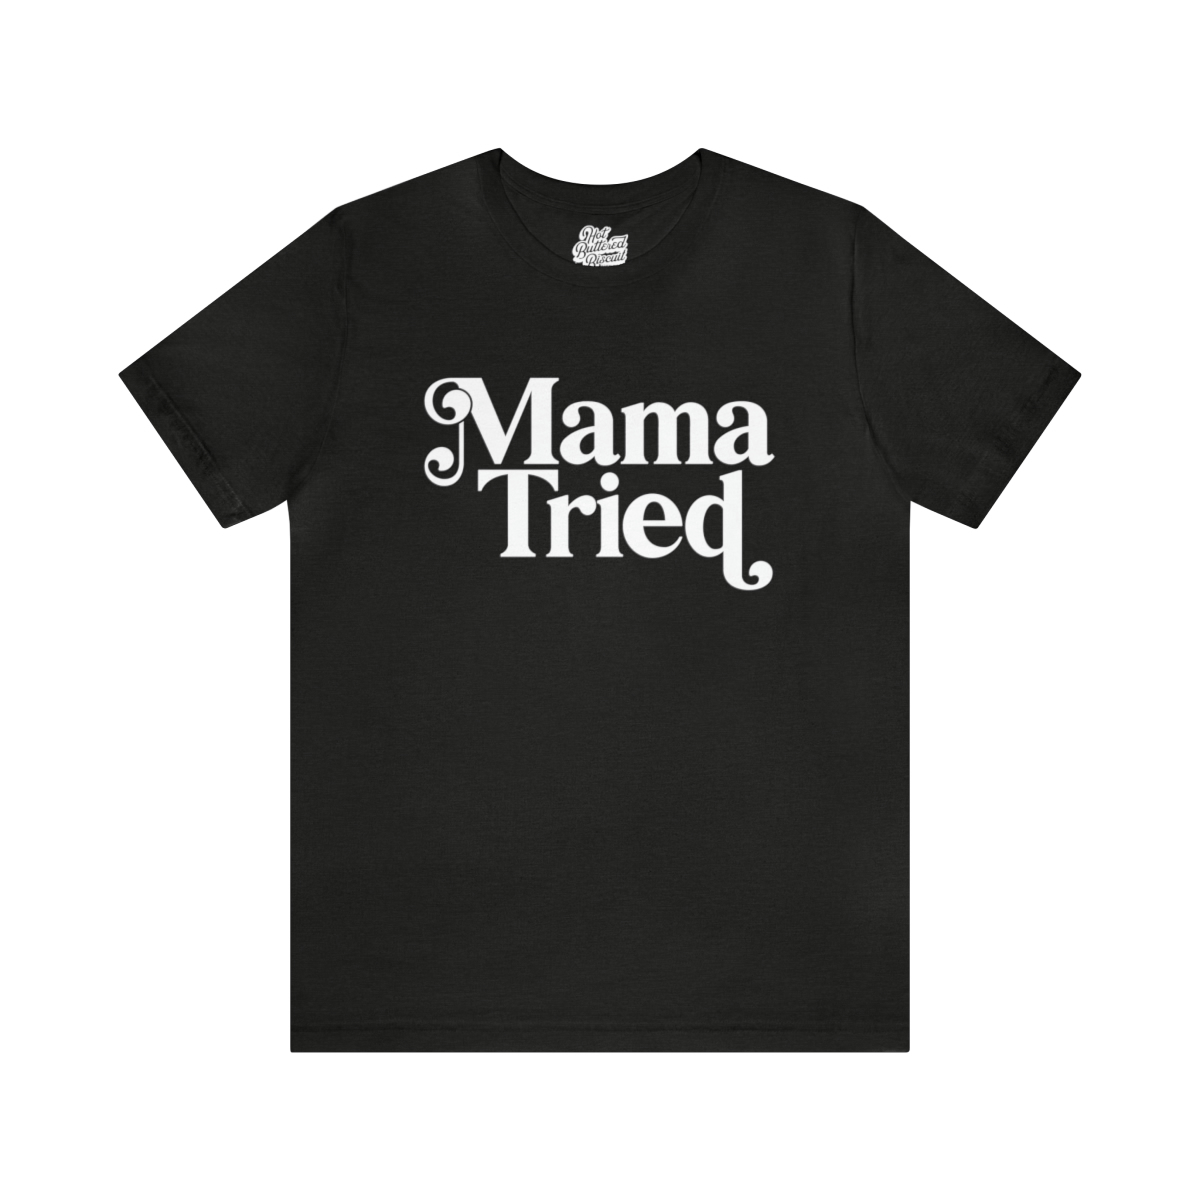 Are you the one and only rebel child from a family meek and mild? Perfect for wearing on a freight train leaving town without knowing where your bound. 

Printed on a…